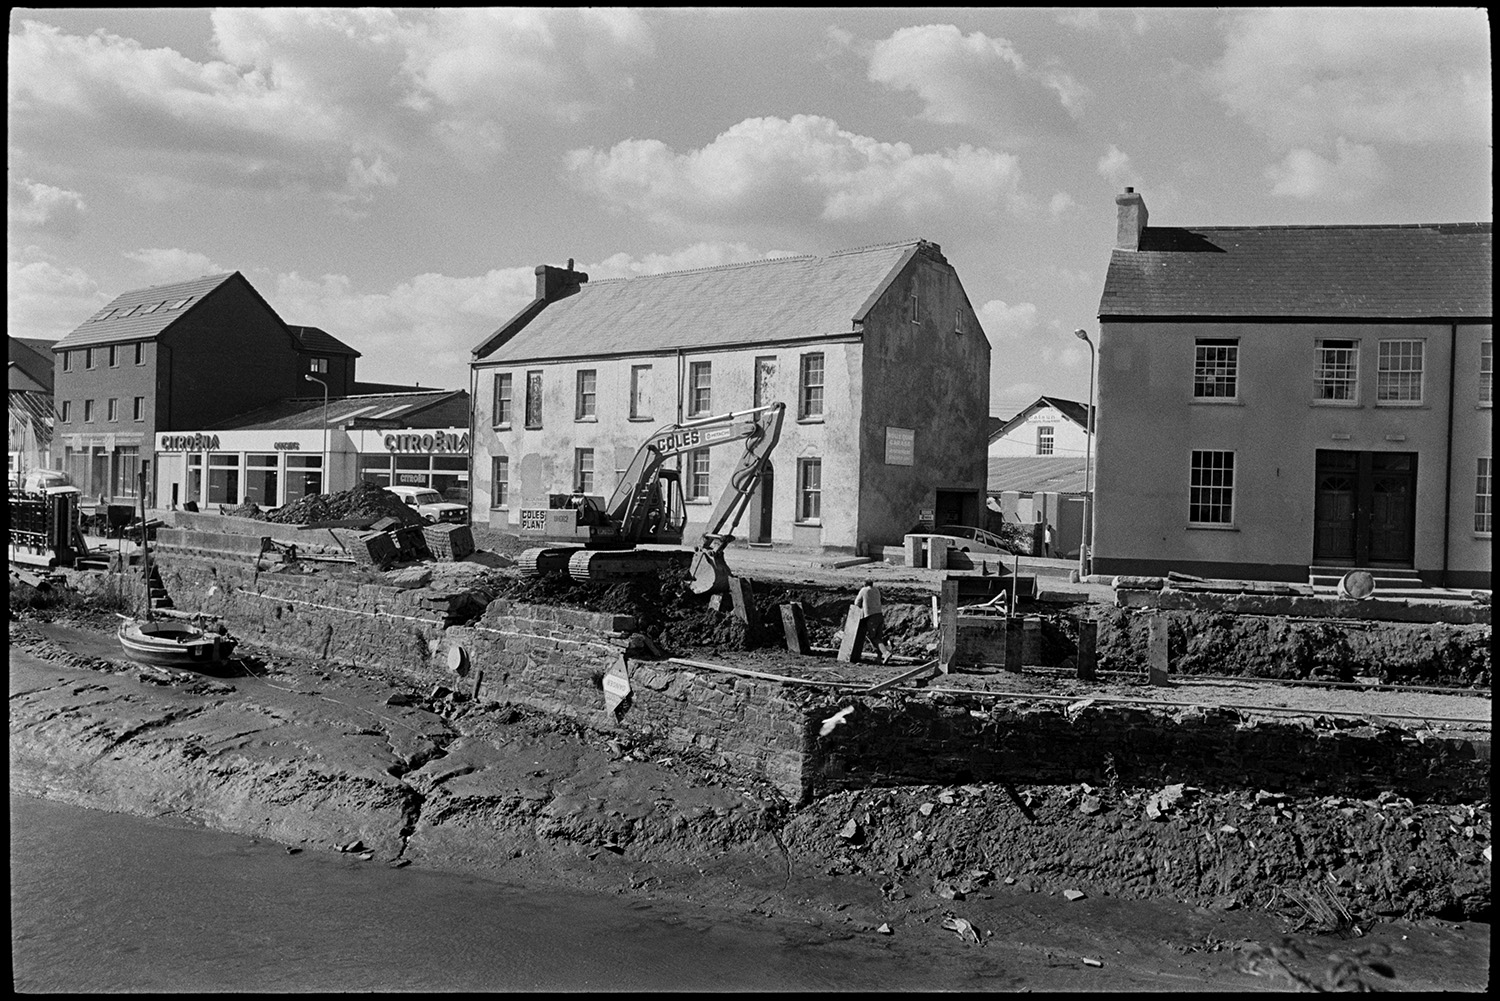 Repair work on quay, mechanical digger, quayside houses.
[Repair work, using a mechanical digger, to the quayside stone wall at Rolle Quay, Barnstaple. A small boat is on the mud bank. Old quayside properties stand beside a new car garage in the background.]